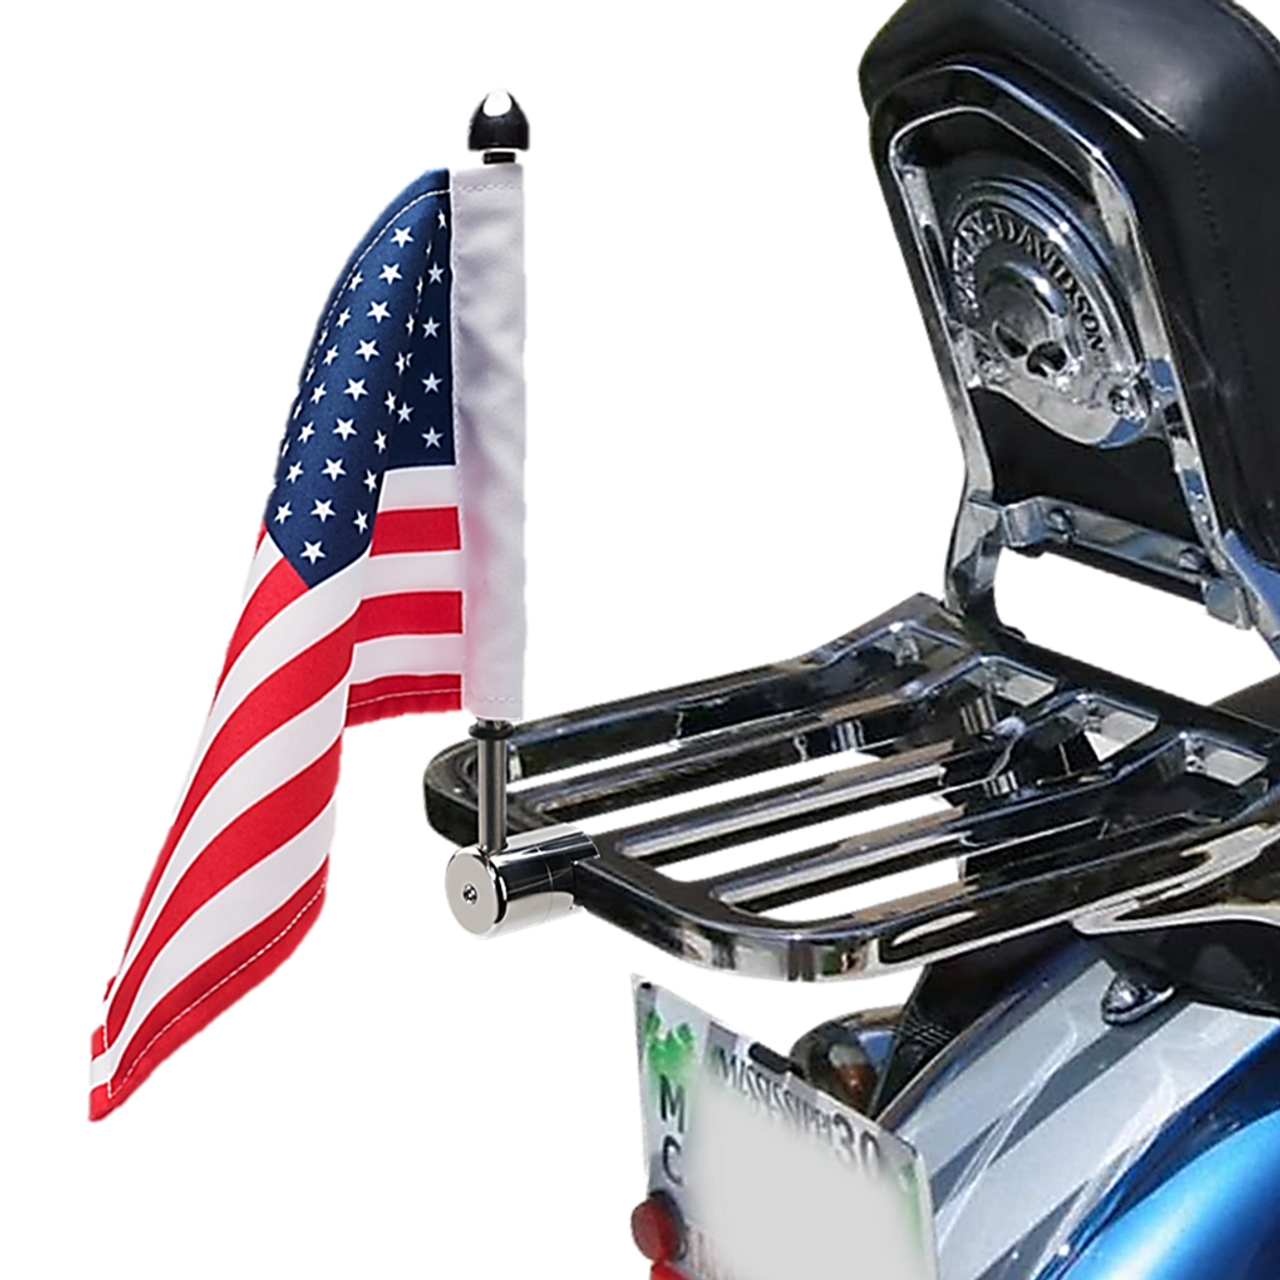 .5" - .6" square rack flag mount with 9" pole, standard cone topper and
6"x9" USA flag on Harley Sport Rack (rack not included; polished stainless version)